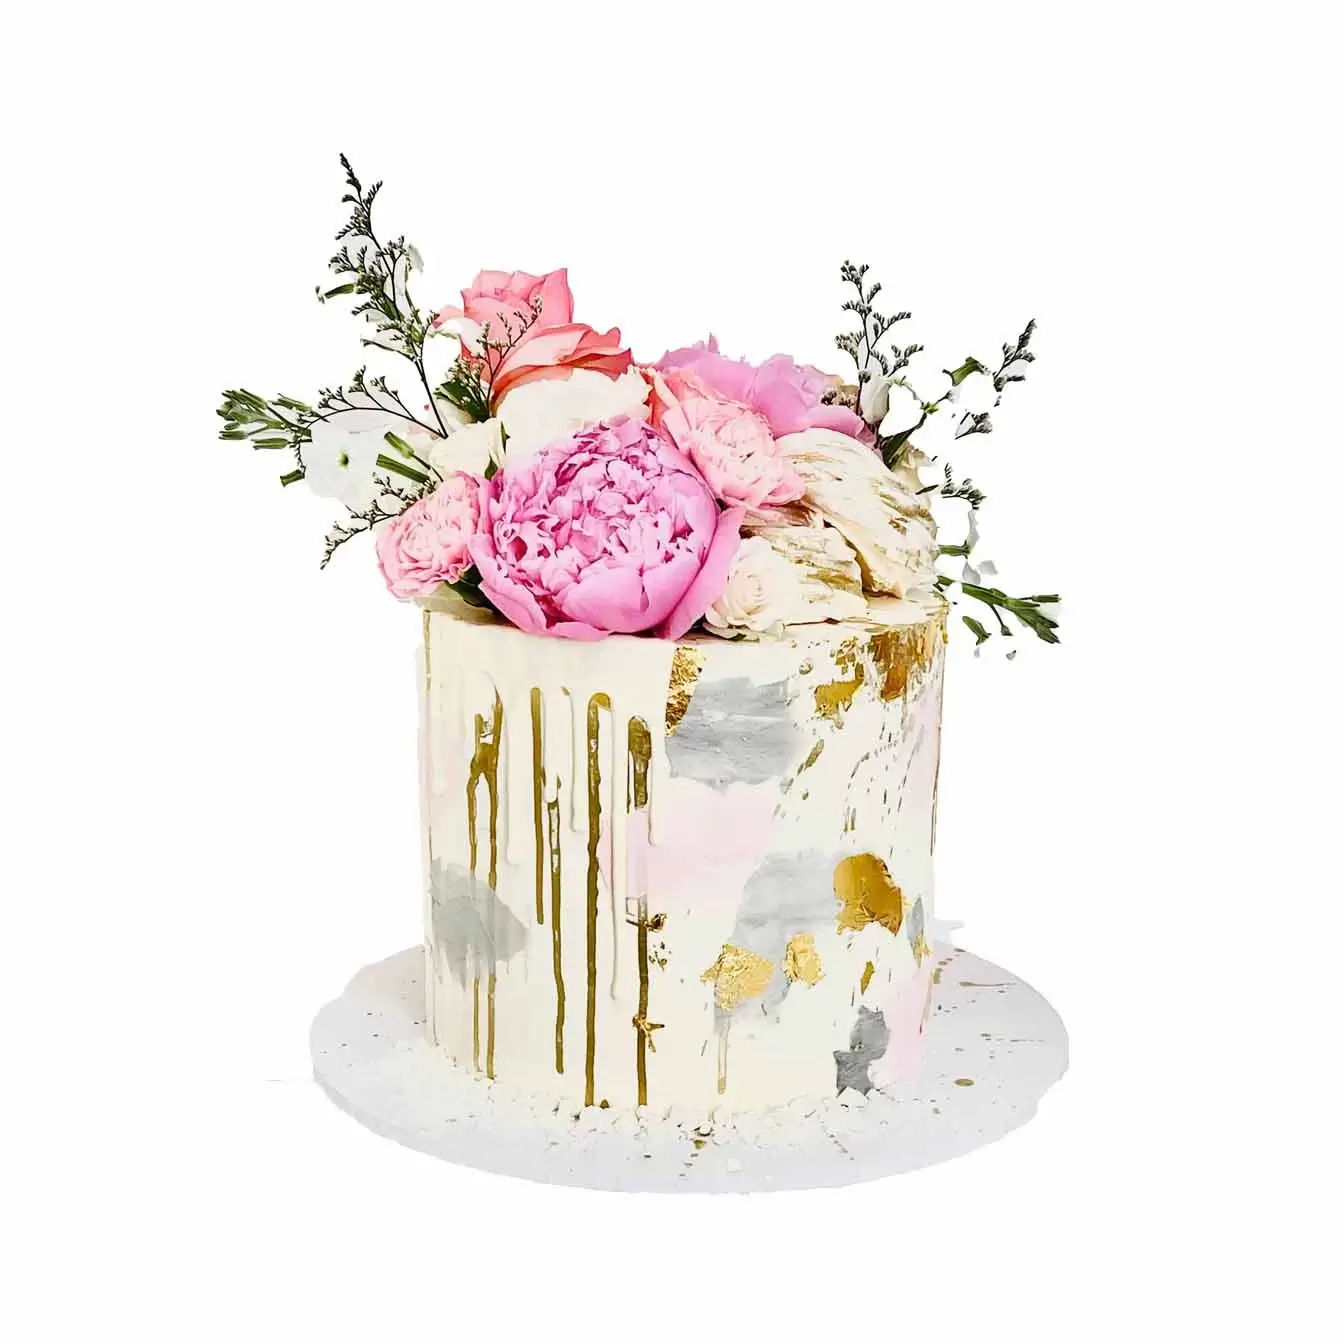 Blush Elegance Wedding Cake - A harmonious blend of pink, white, grey, and gold, adorned with a delicate white drip and fresh flowers, a timeless centerpiece for a romantic celebration.